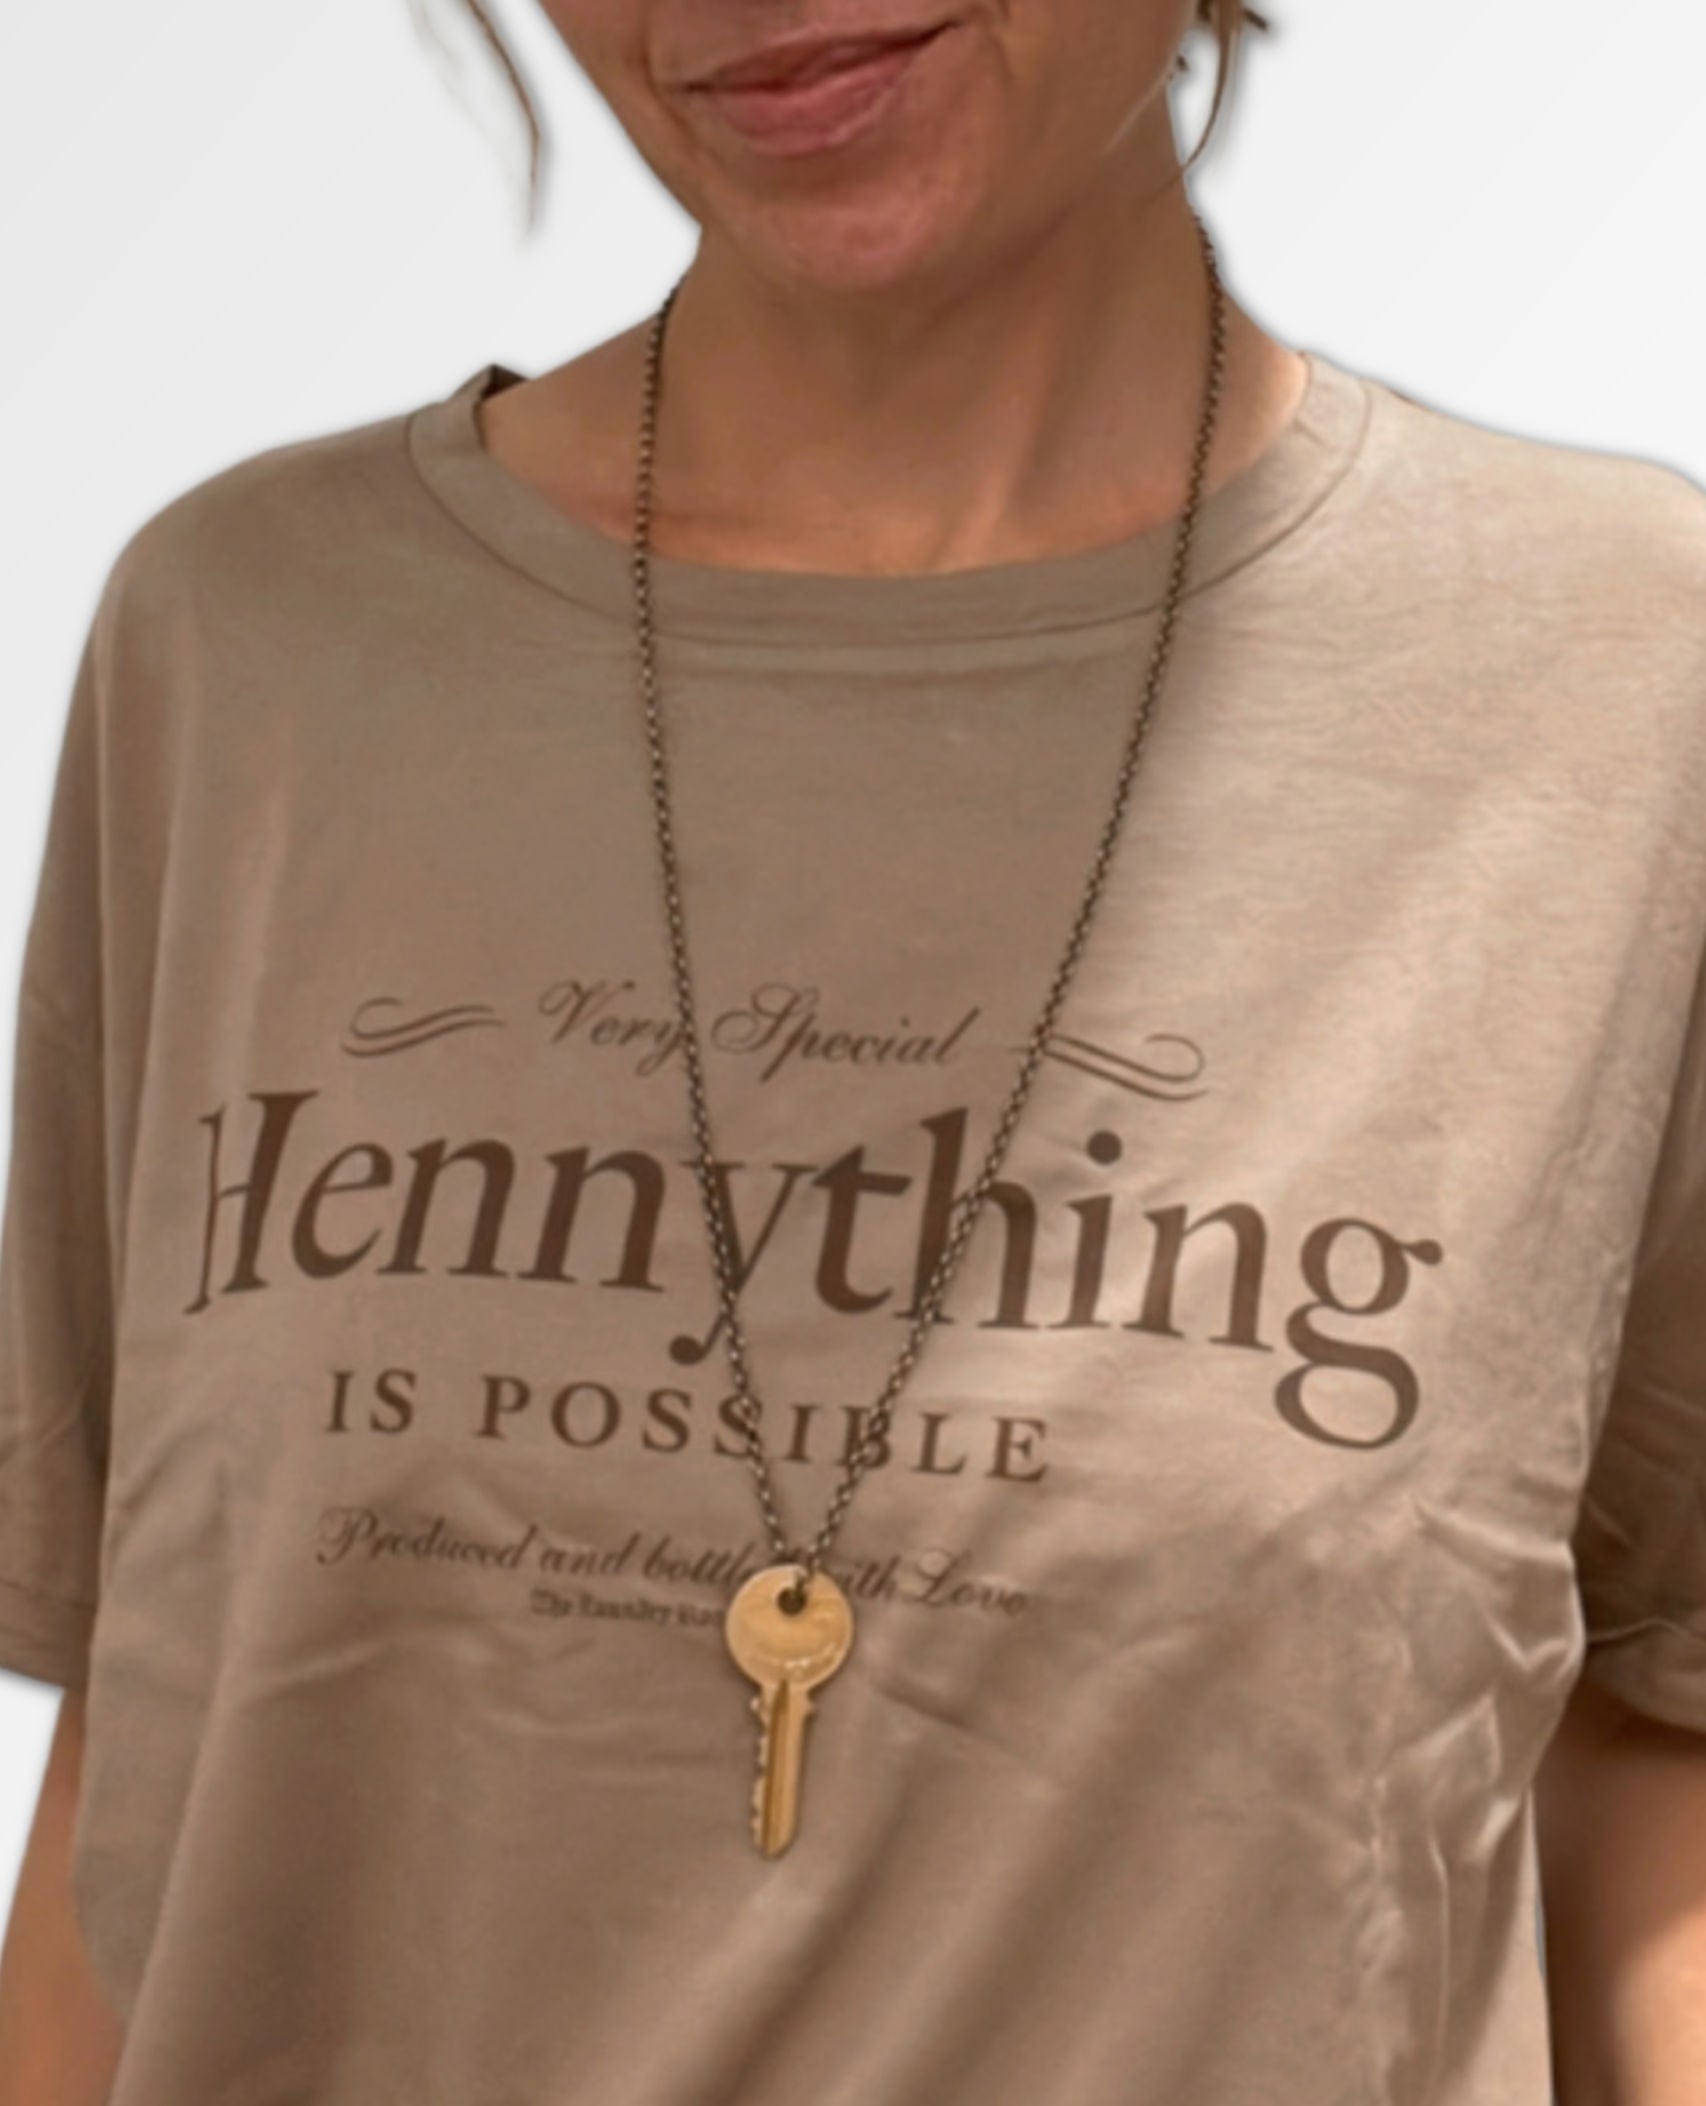 Hennything is Possible T-Shirt